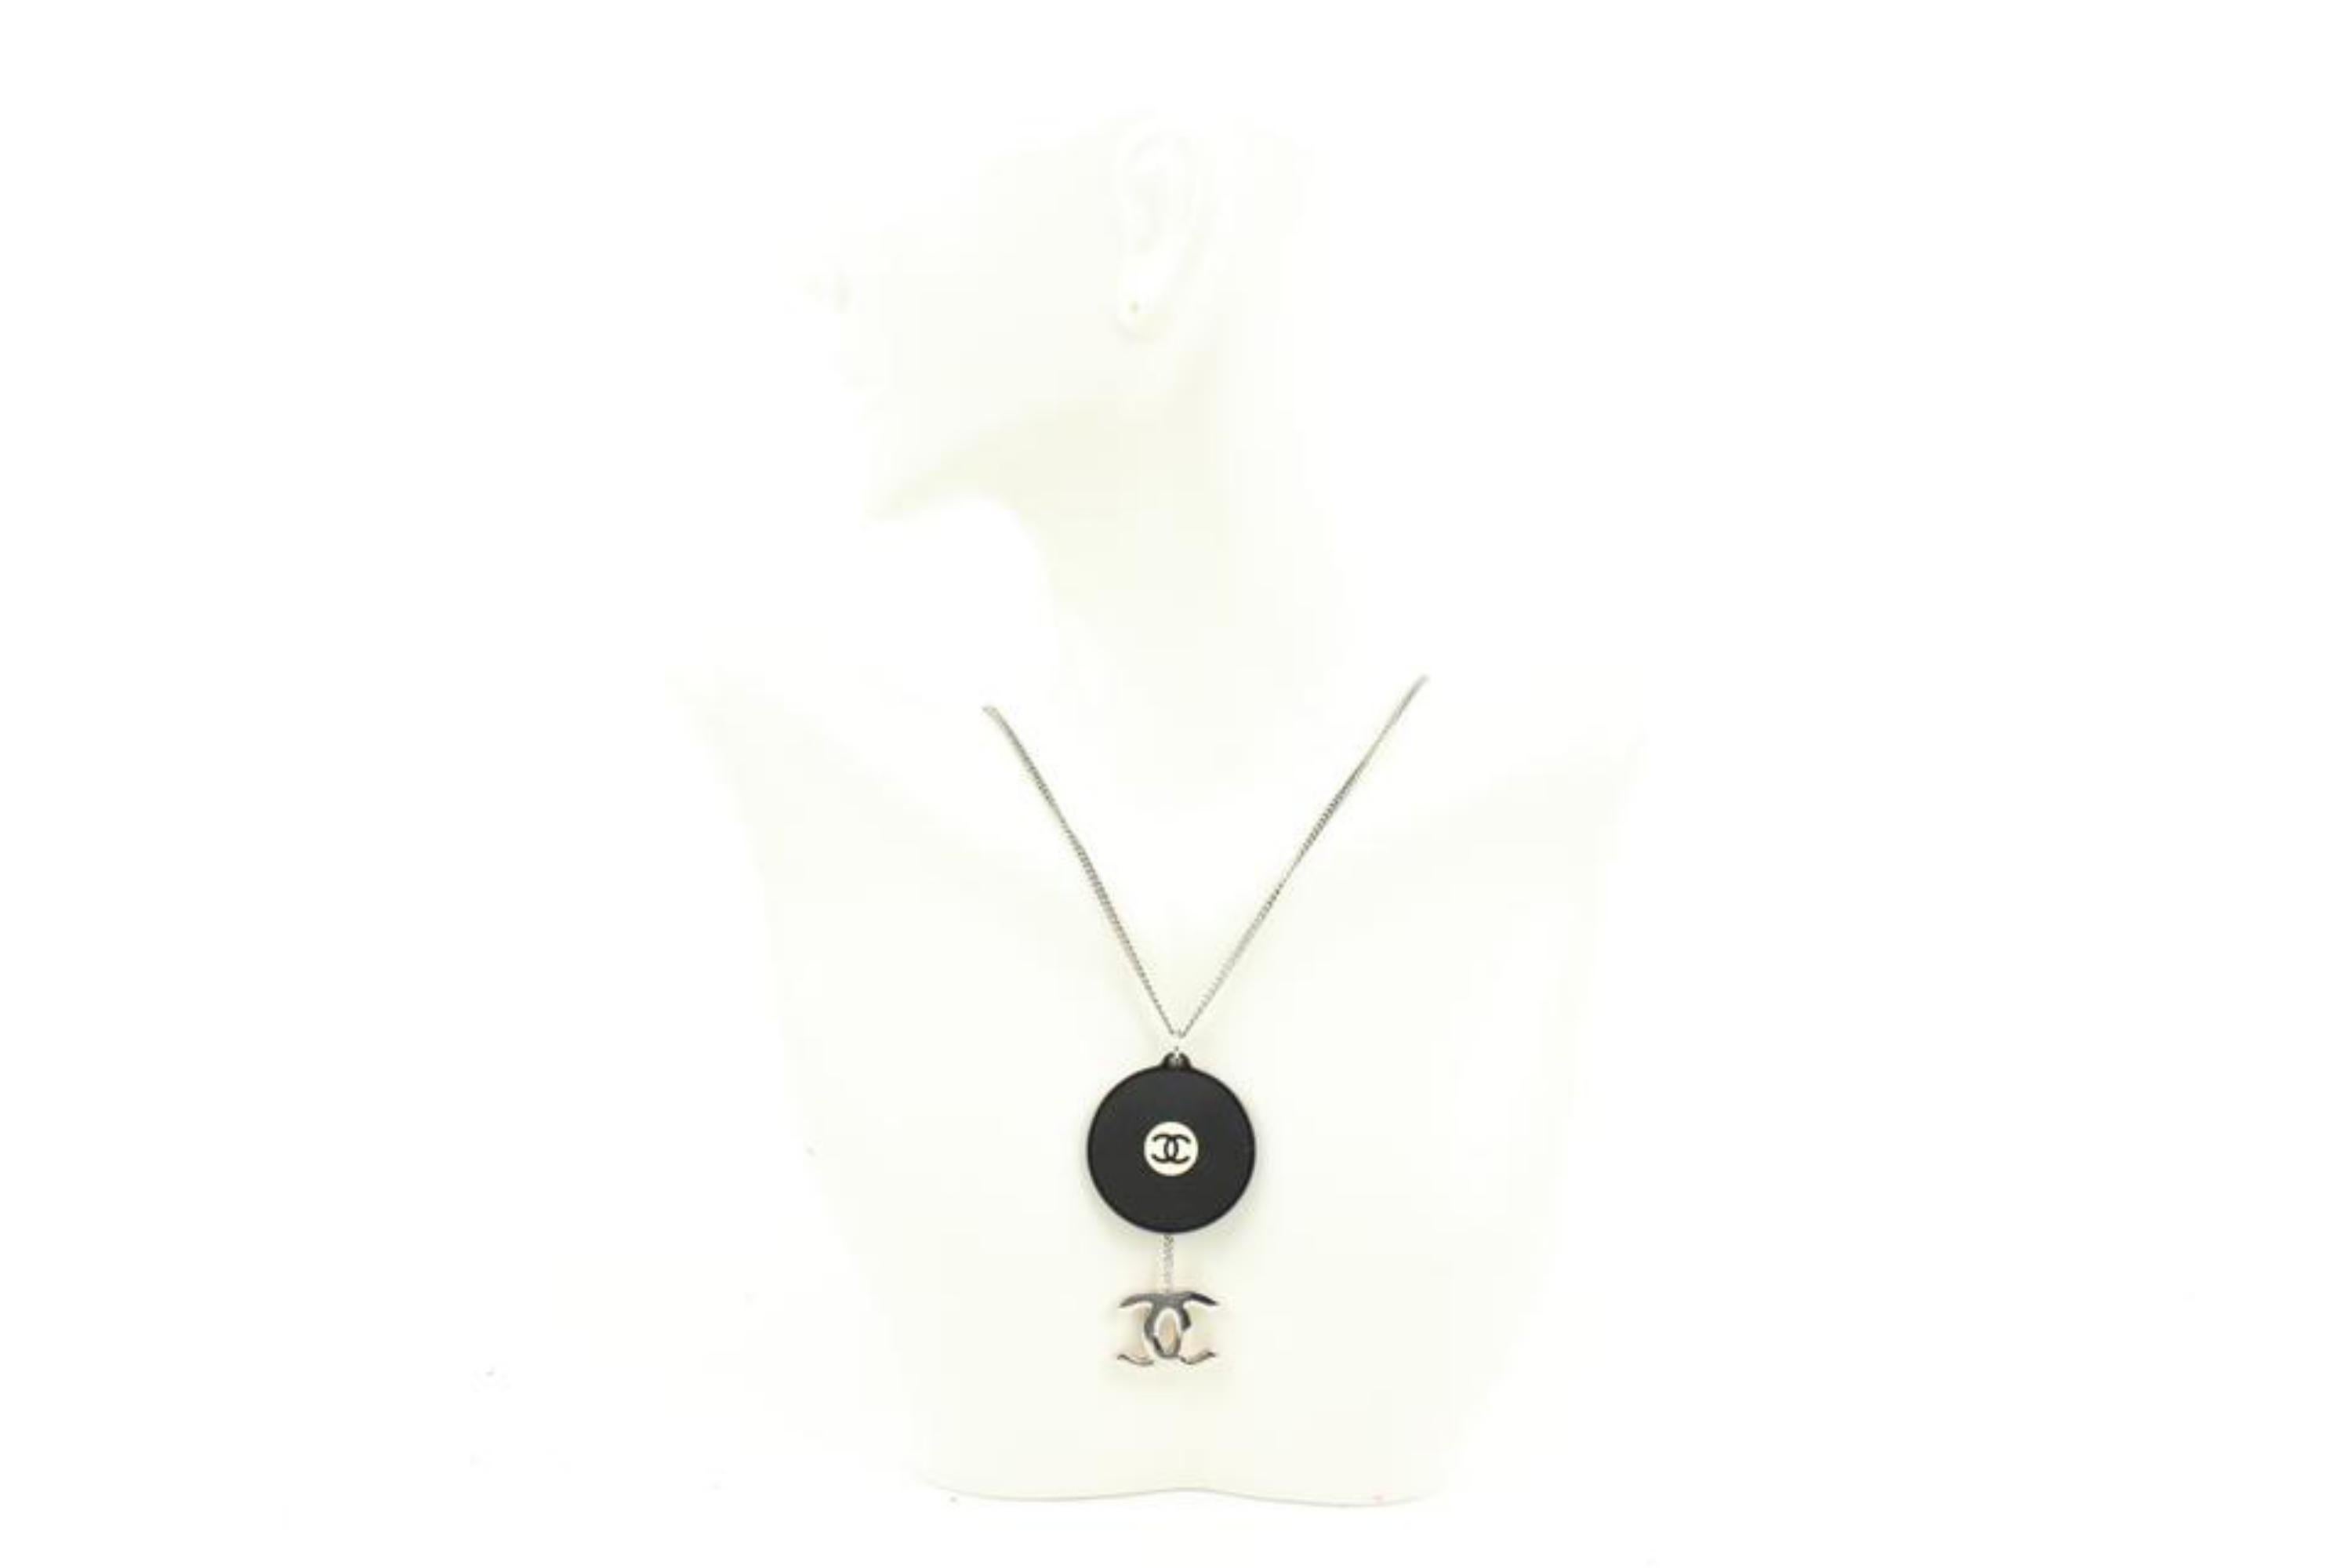 Chanel 04P Record Chain Necklace s210ck63
Date Code/Serial Number: 04 P
Made In: Italy
Measurements: Length:  16.5